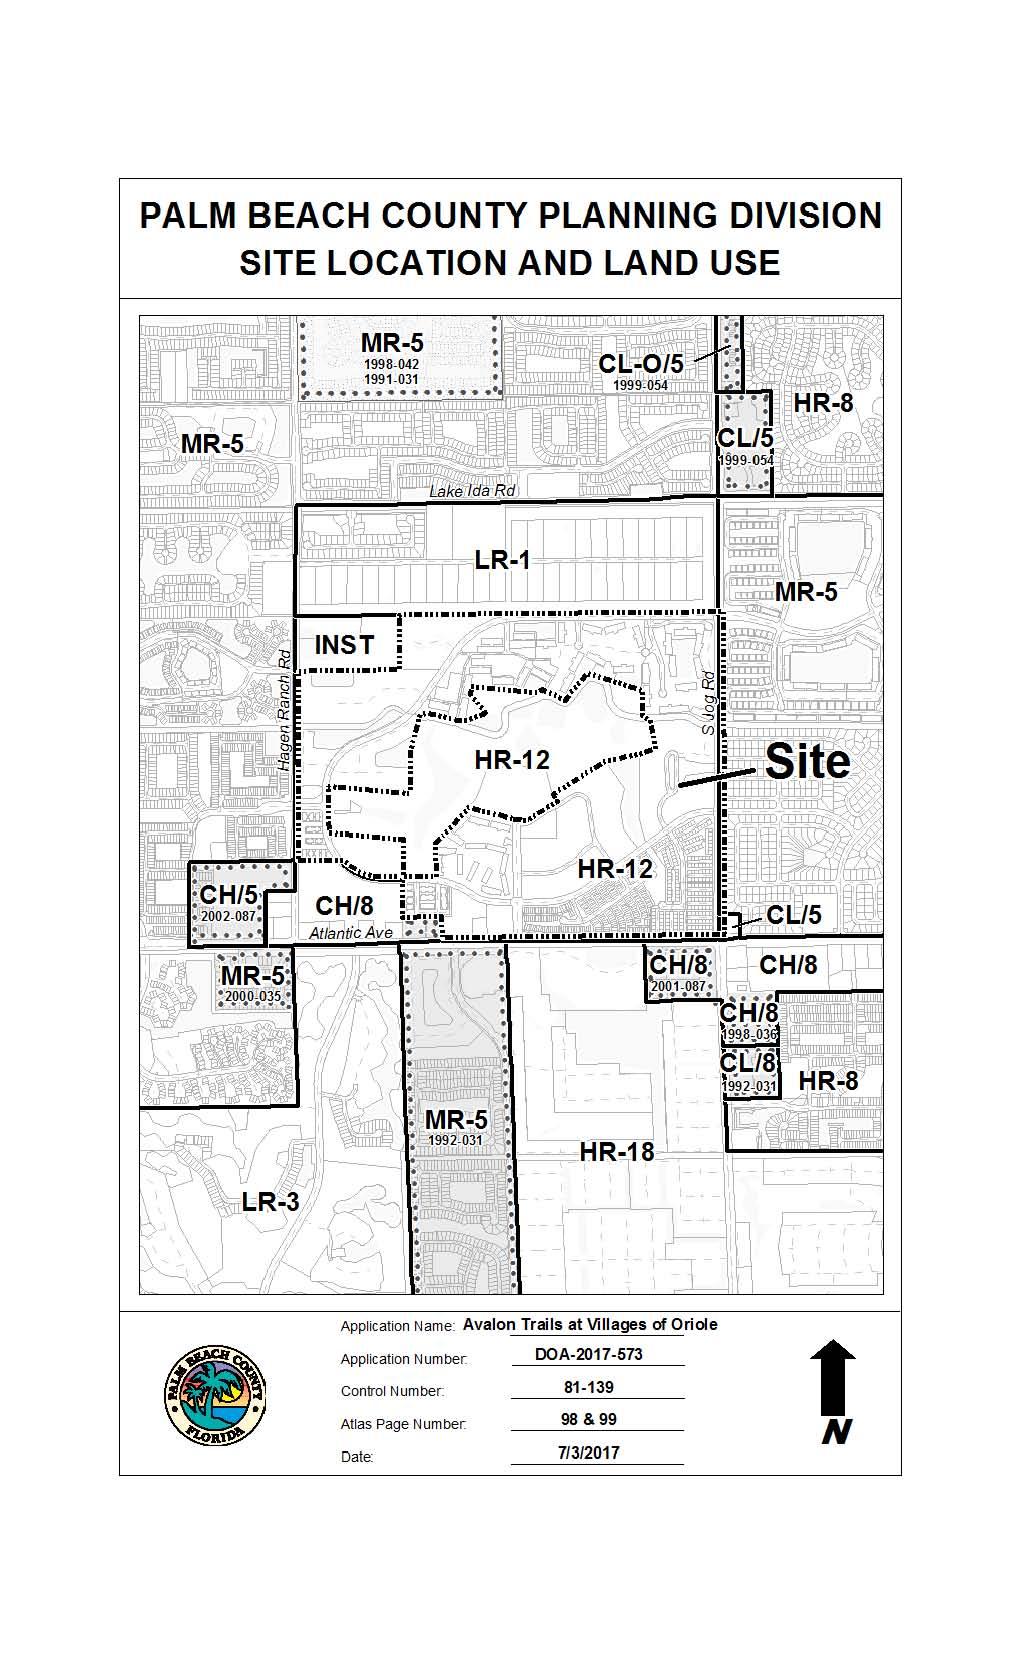 Figure 1 Land Use Map PALM BEACH COUNTY PLANNING DIVISION SITE LOCATION AND LAND USE MR-5 1998_042 1991 _031 HR-12 CH/8 Applic atkln Name: Avalon Trai ls